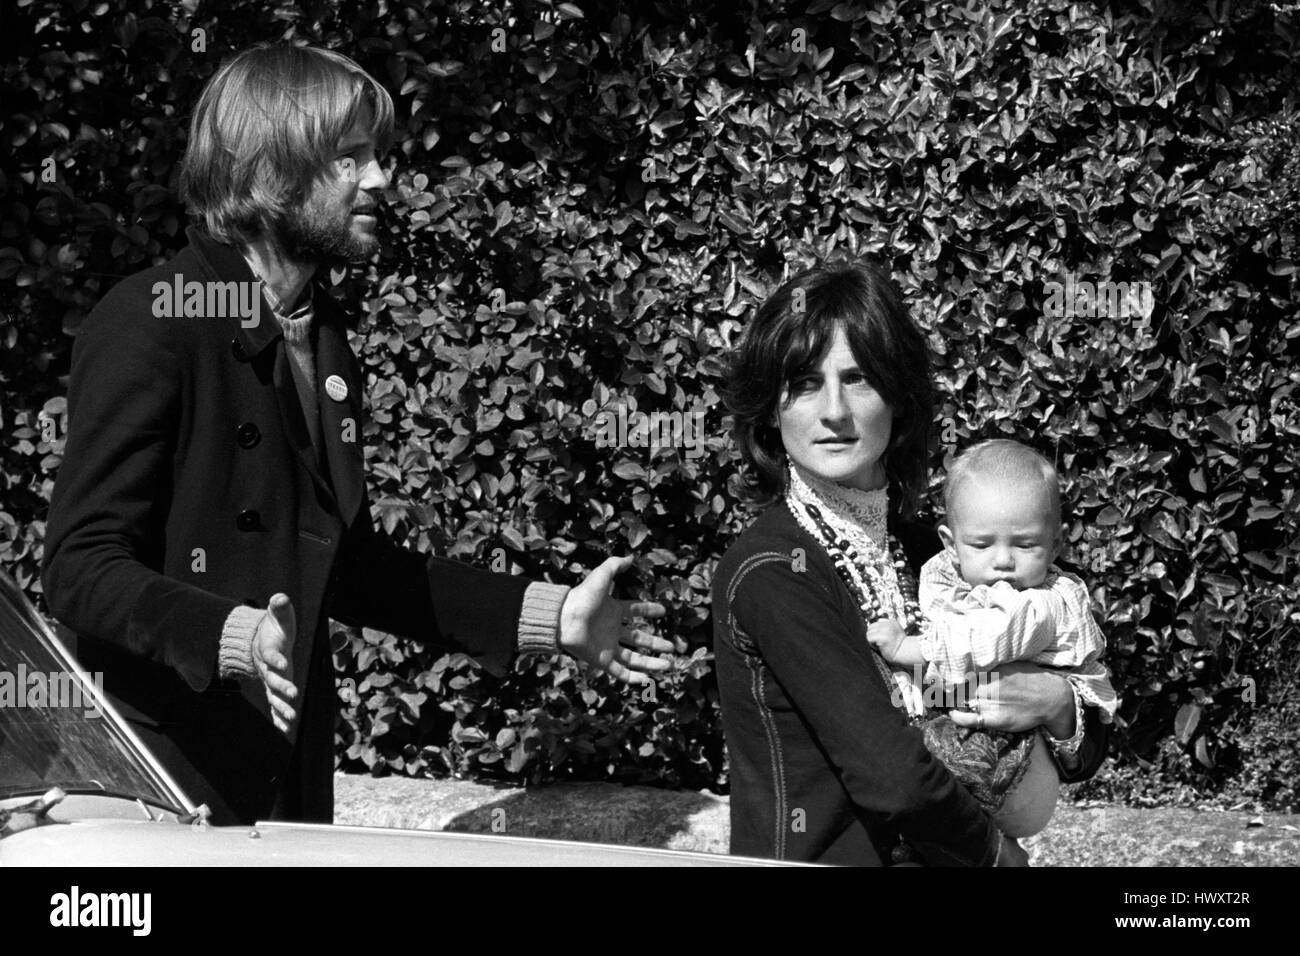 Michael Rainey with his wife Jane (daughter of Lord Harlech) and their six-month-old baby Saffron in Glastonbury, Somerset. They attended court when Camilla Drummond, 21, and Luiz Saldanha, 24, were fined on on drugs charges. The Rainey's were mentioned by Roger Stokes, prosecuting. Stock Photo